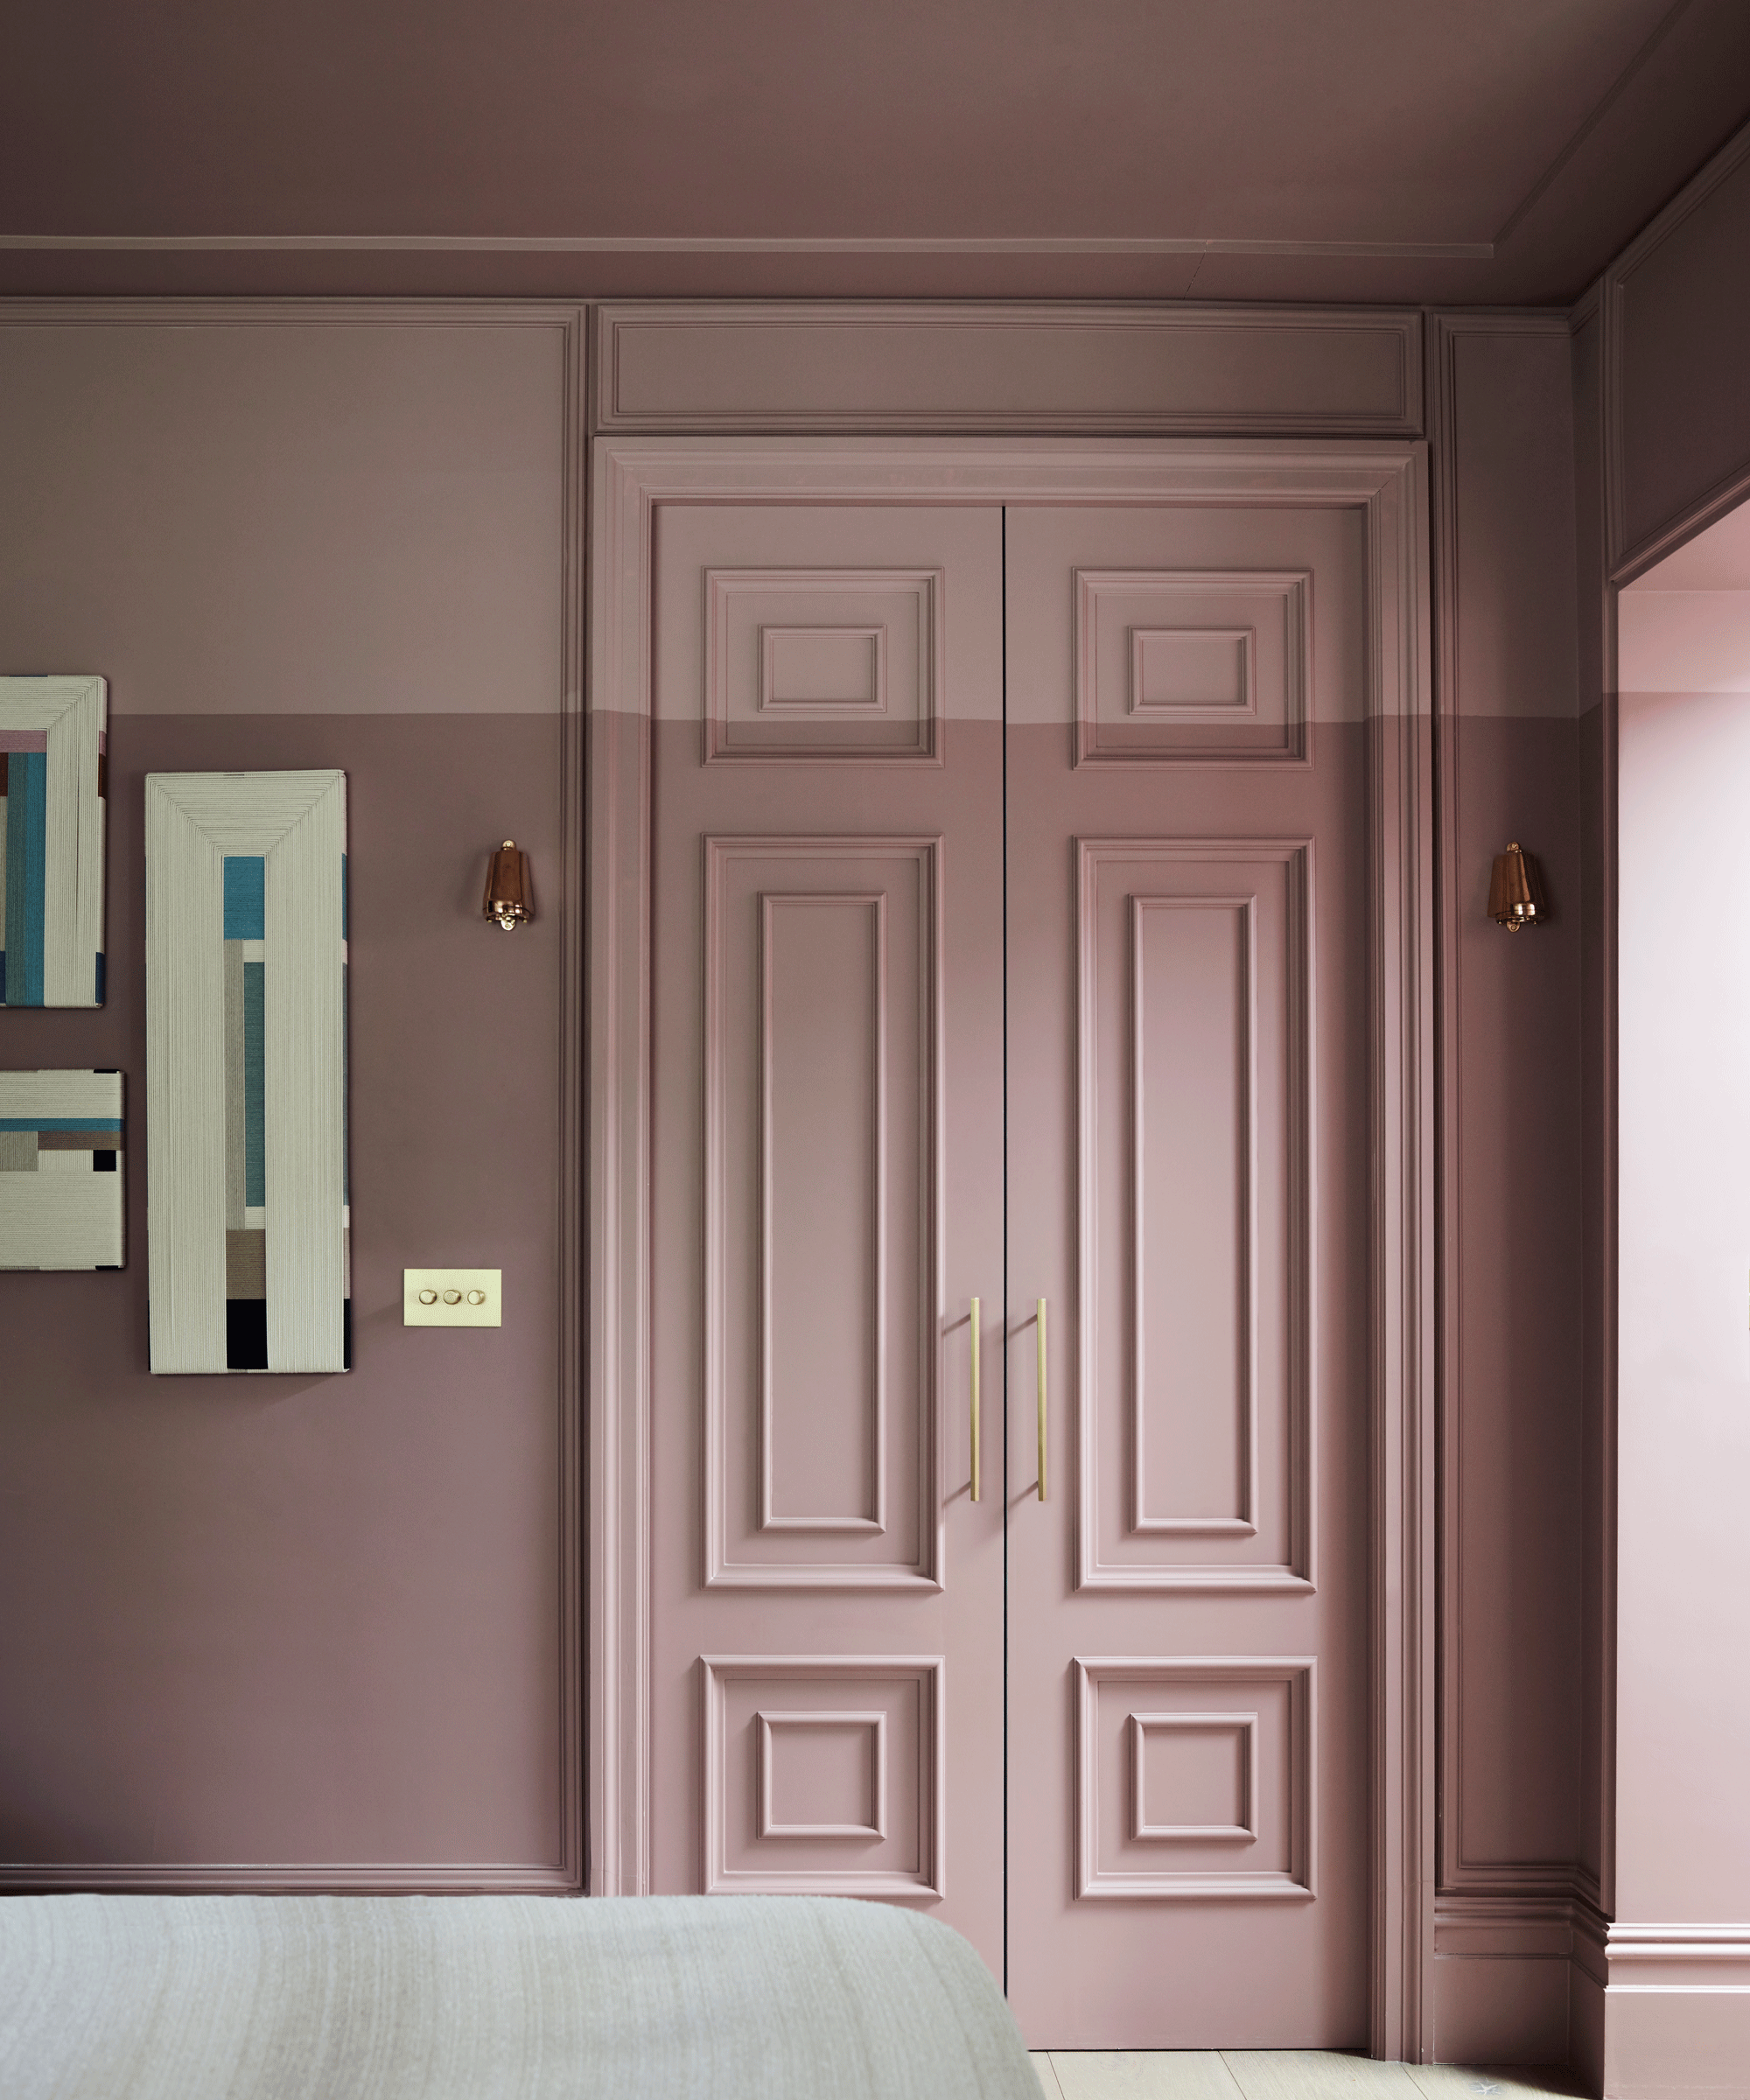 A panelled bedroom door painted two different shades of pink